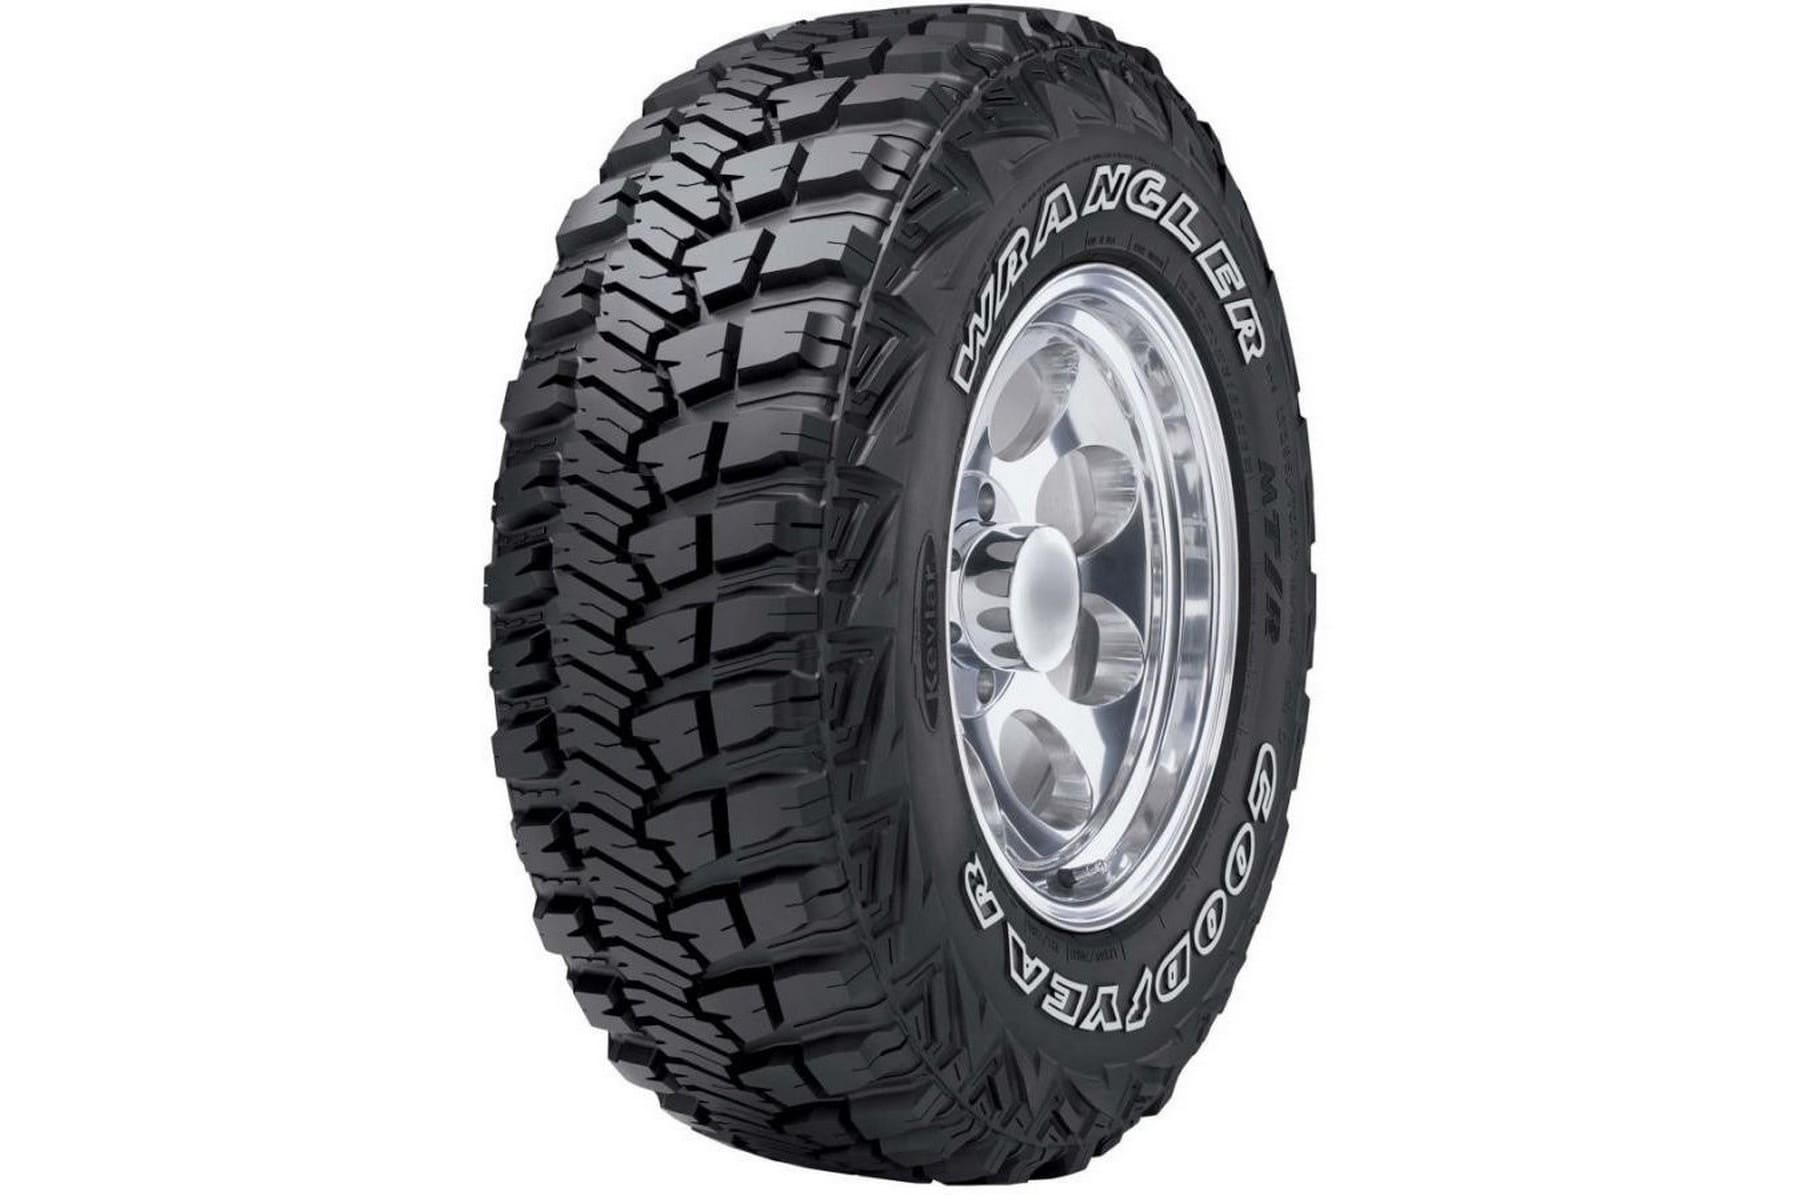 12 Great Tires for Jeep Wrangler - Tire Space - tires reviews all brands